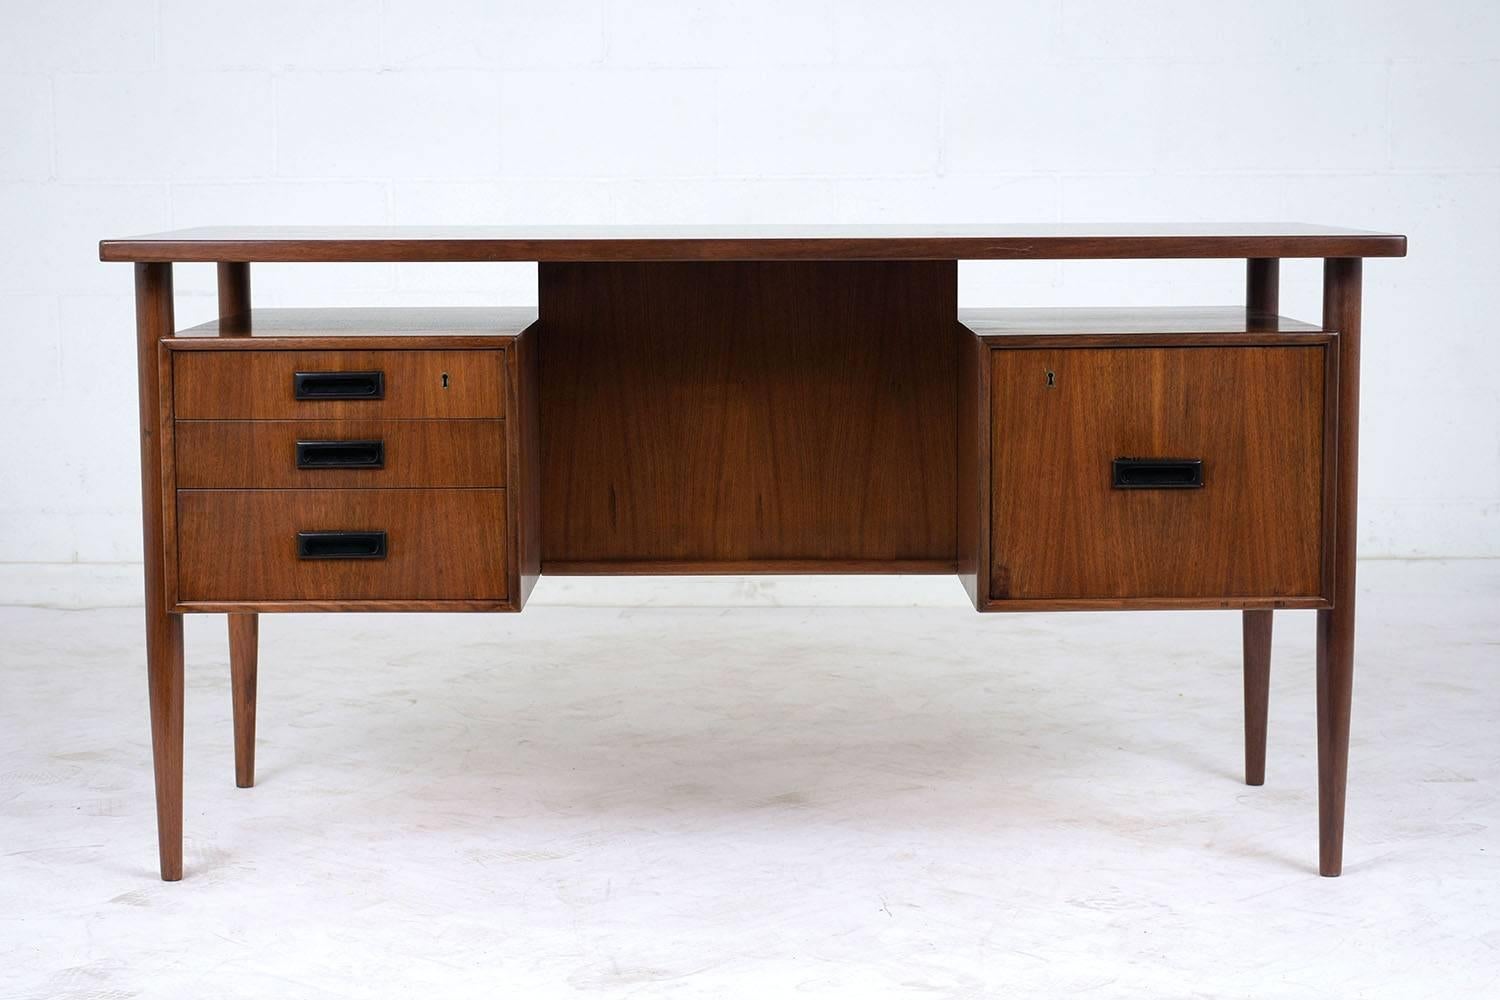 This Mid-Century Modern style floating desk is made from teak wood stained a rich walnut color with a lacquered finish, 1960s. On either side there are two storage cubes with drawers on the front and open shelving finished in black on the back. The